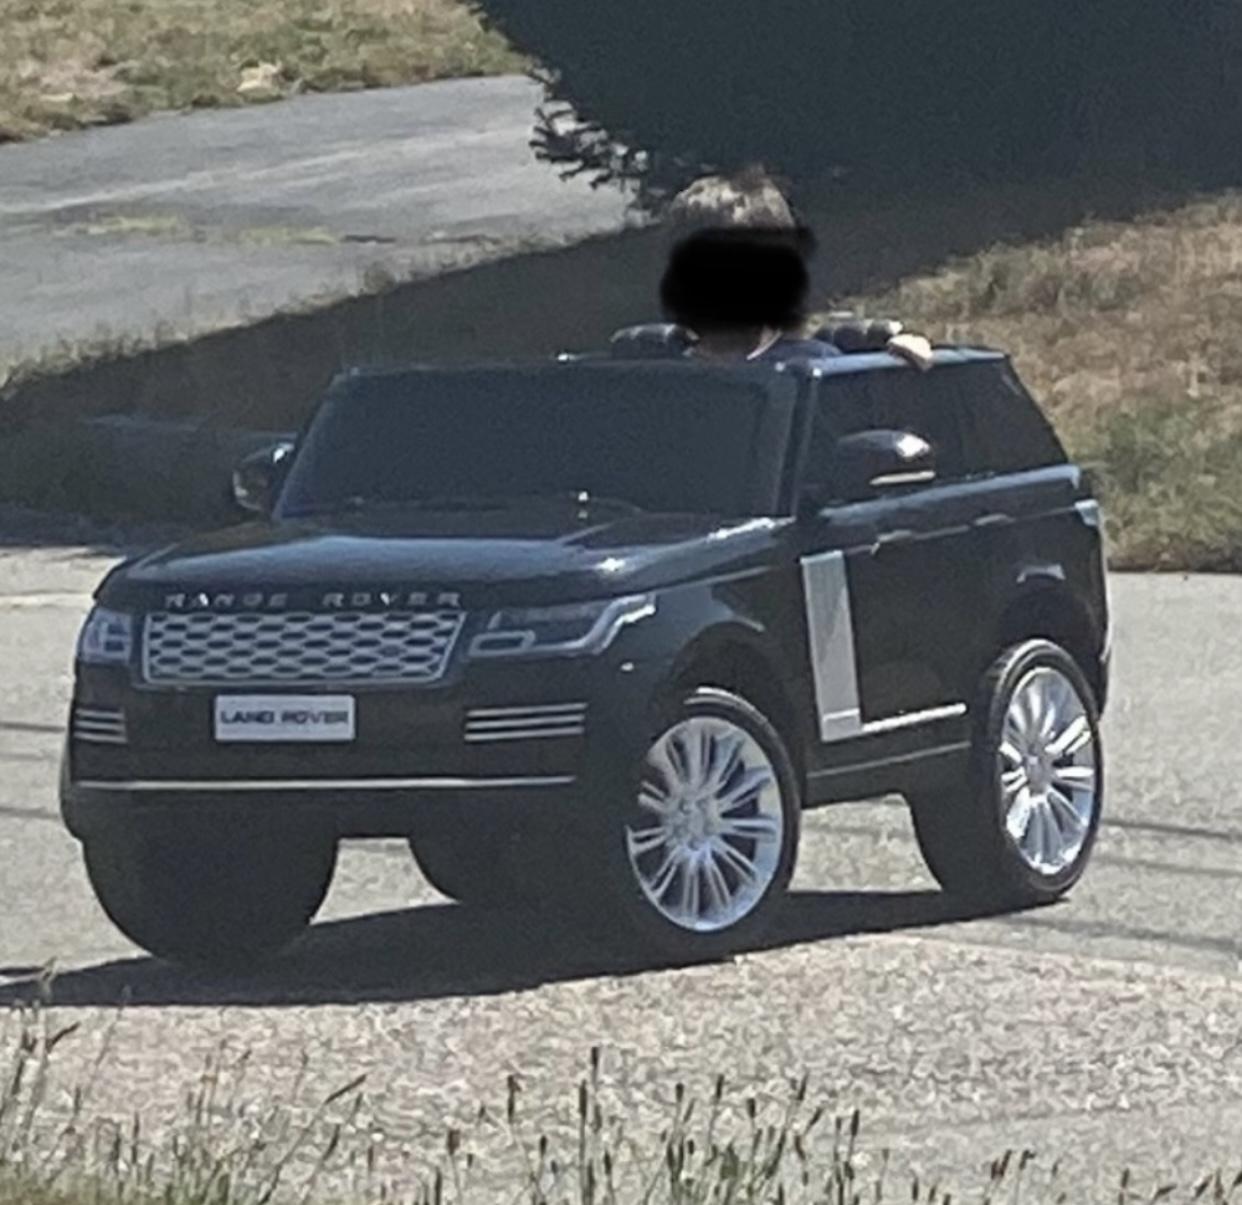 Range Rover HSE Ride on Toy Car